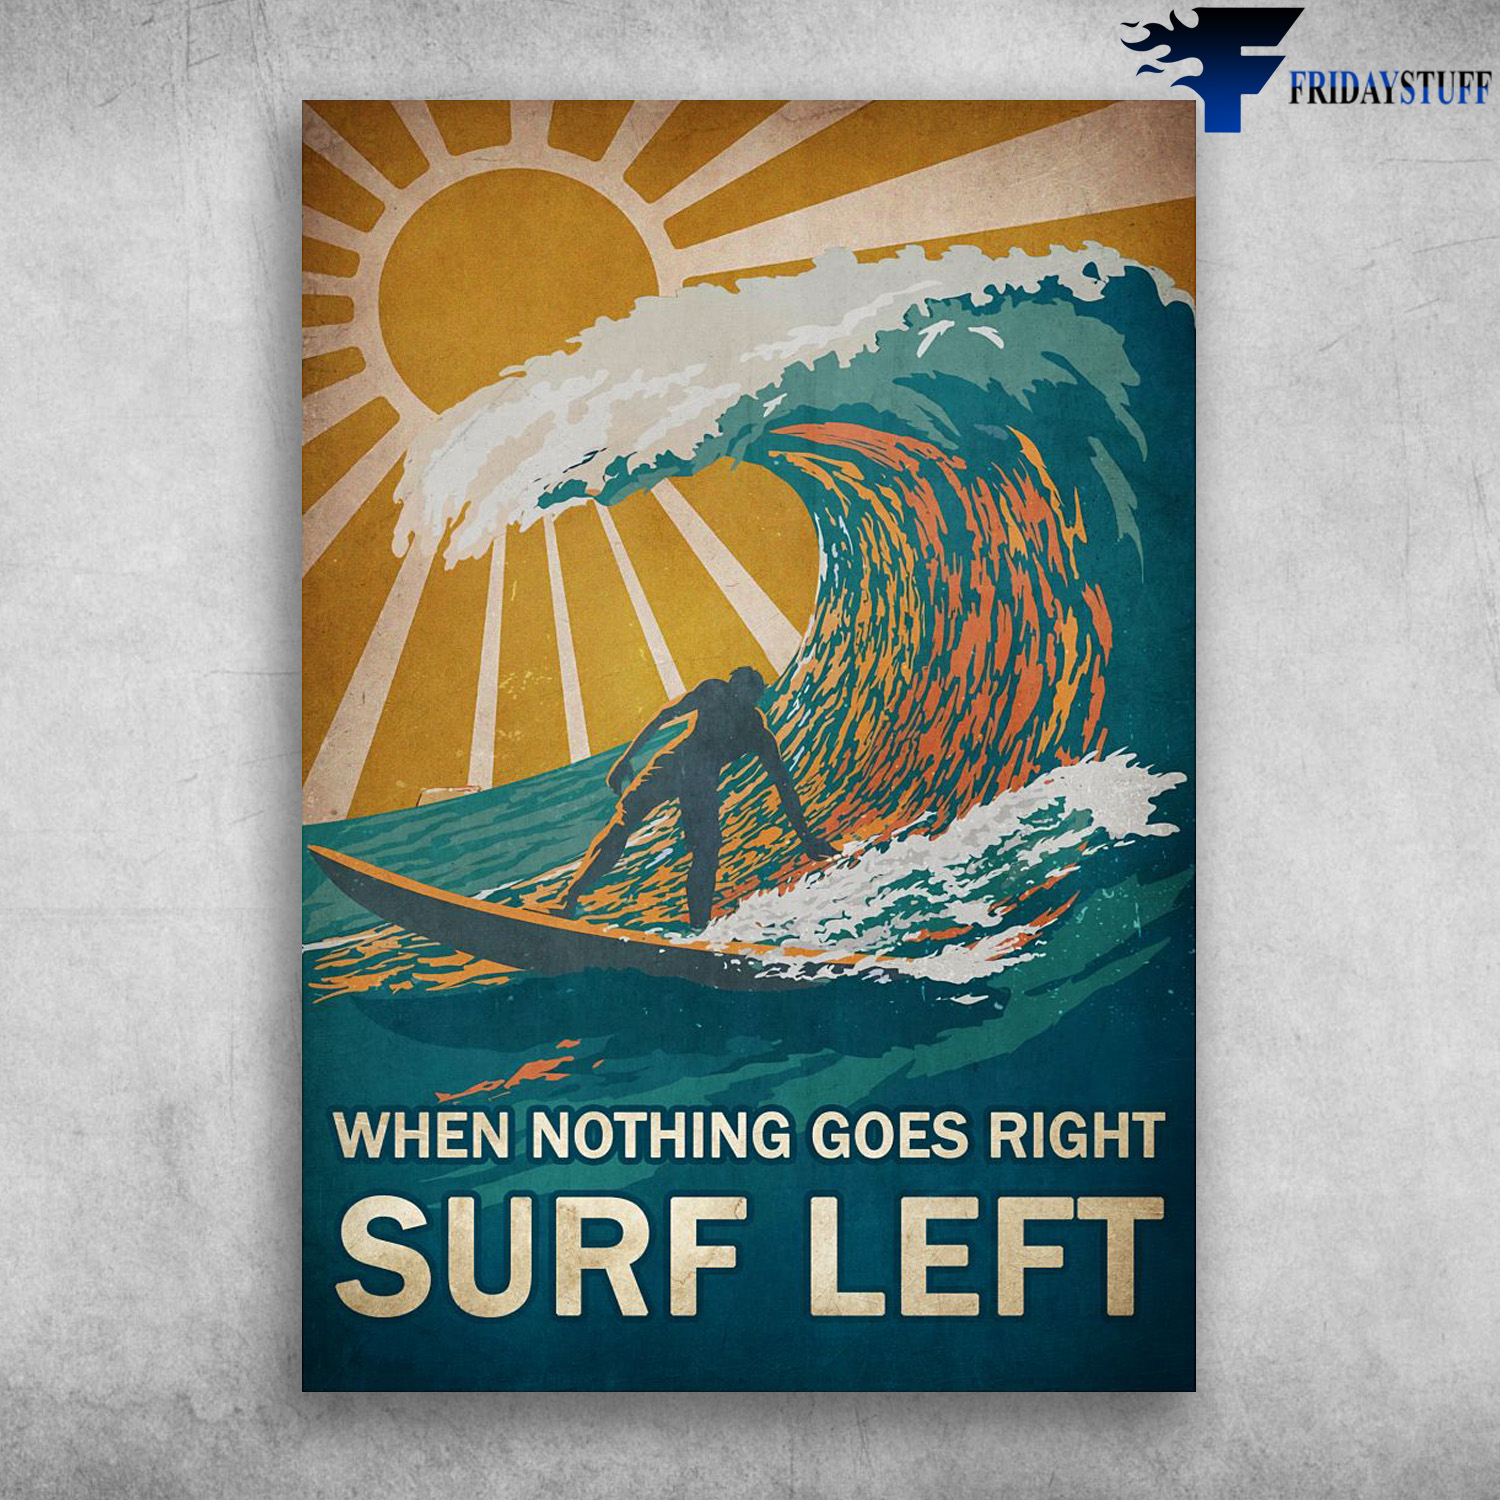 Man Surfing - When Nothing Goes Right, Surf Left